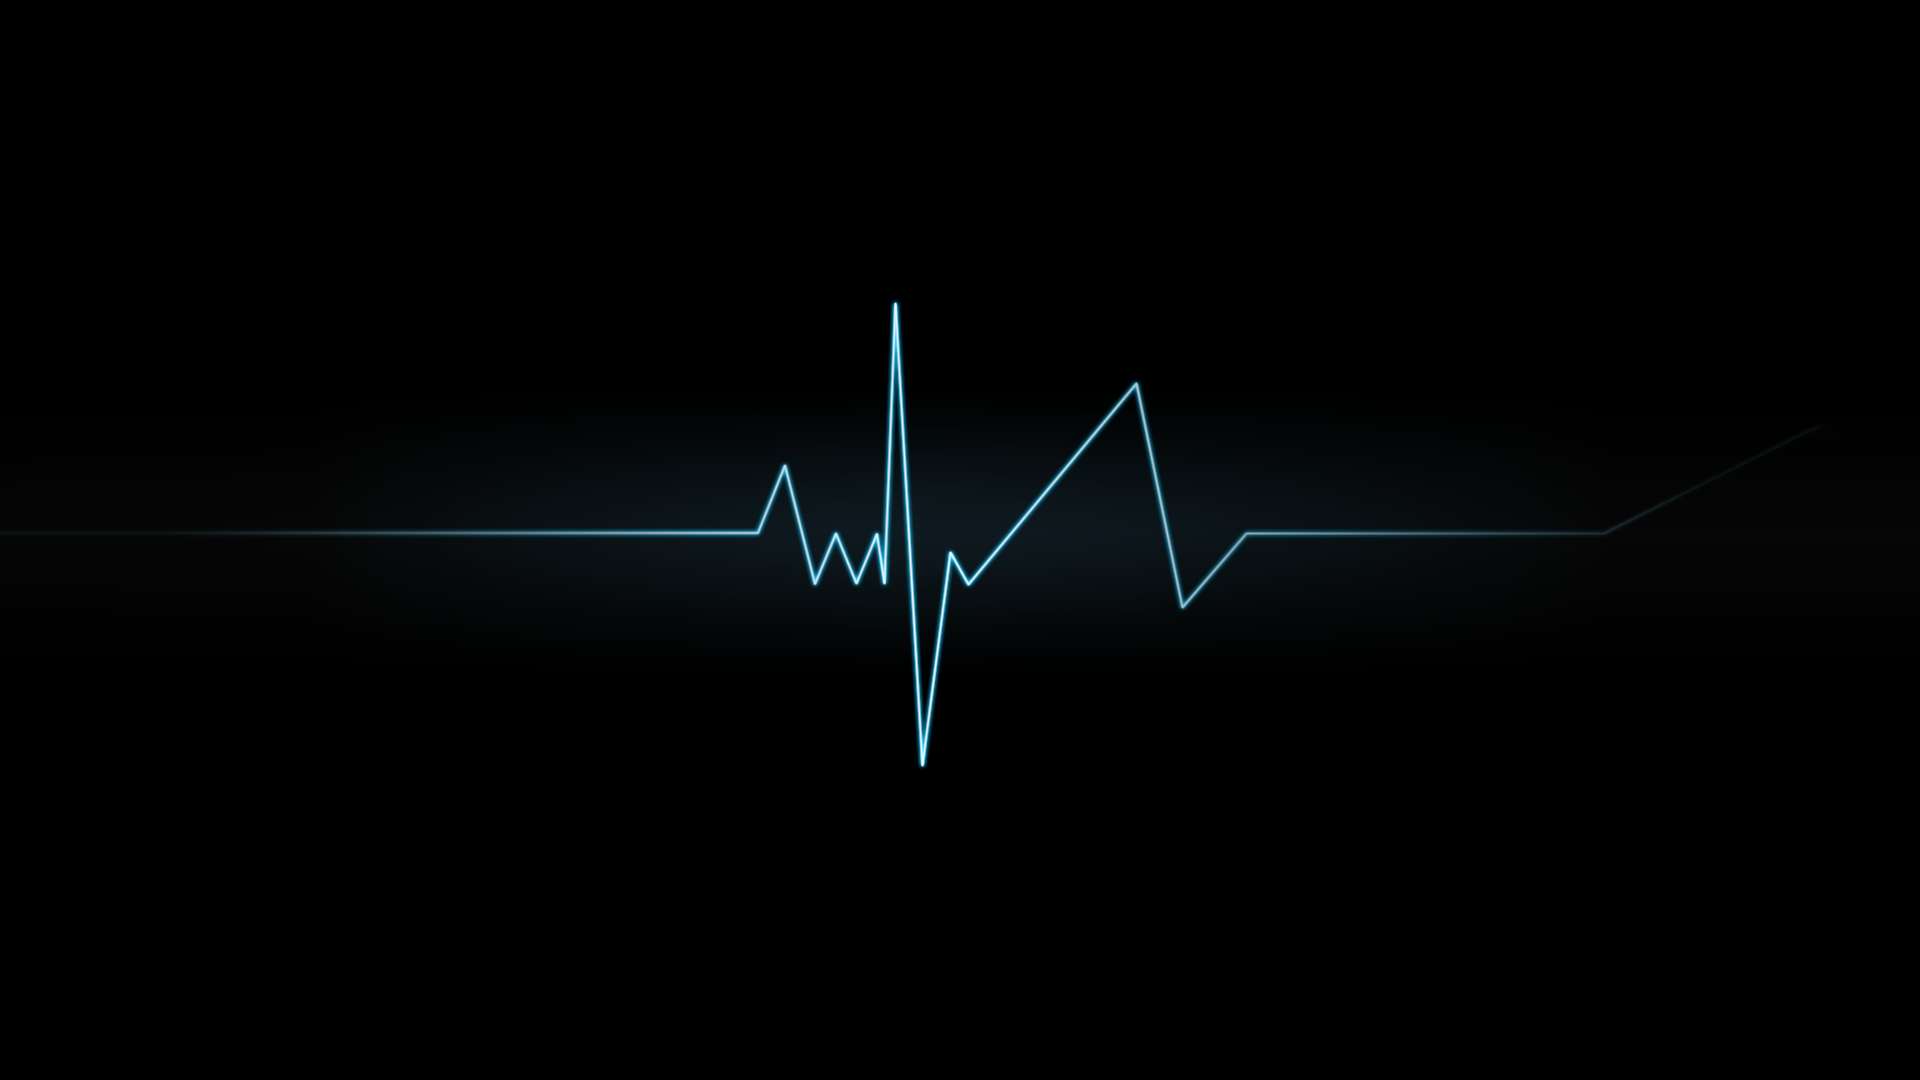 Heartbeat Wallpapers - Wallpaper Cave